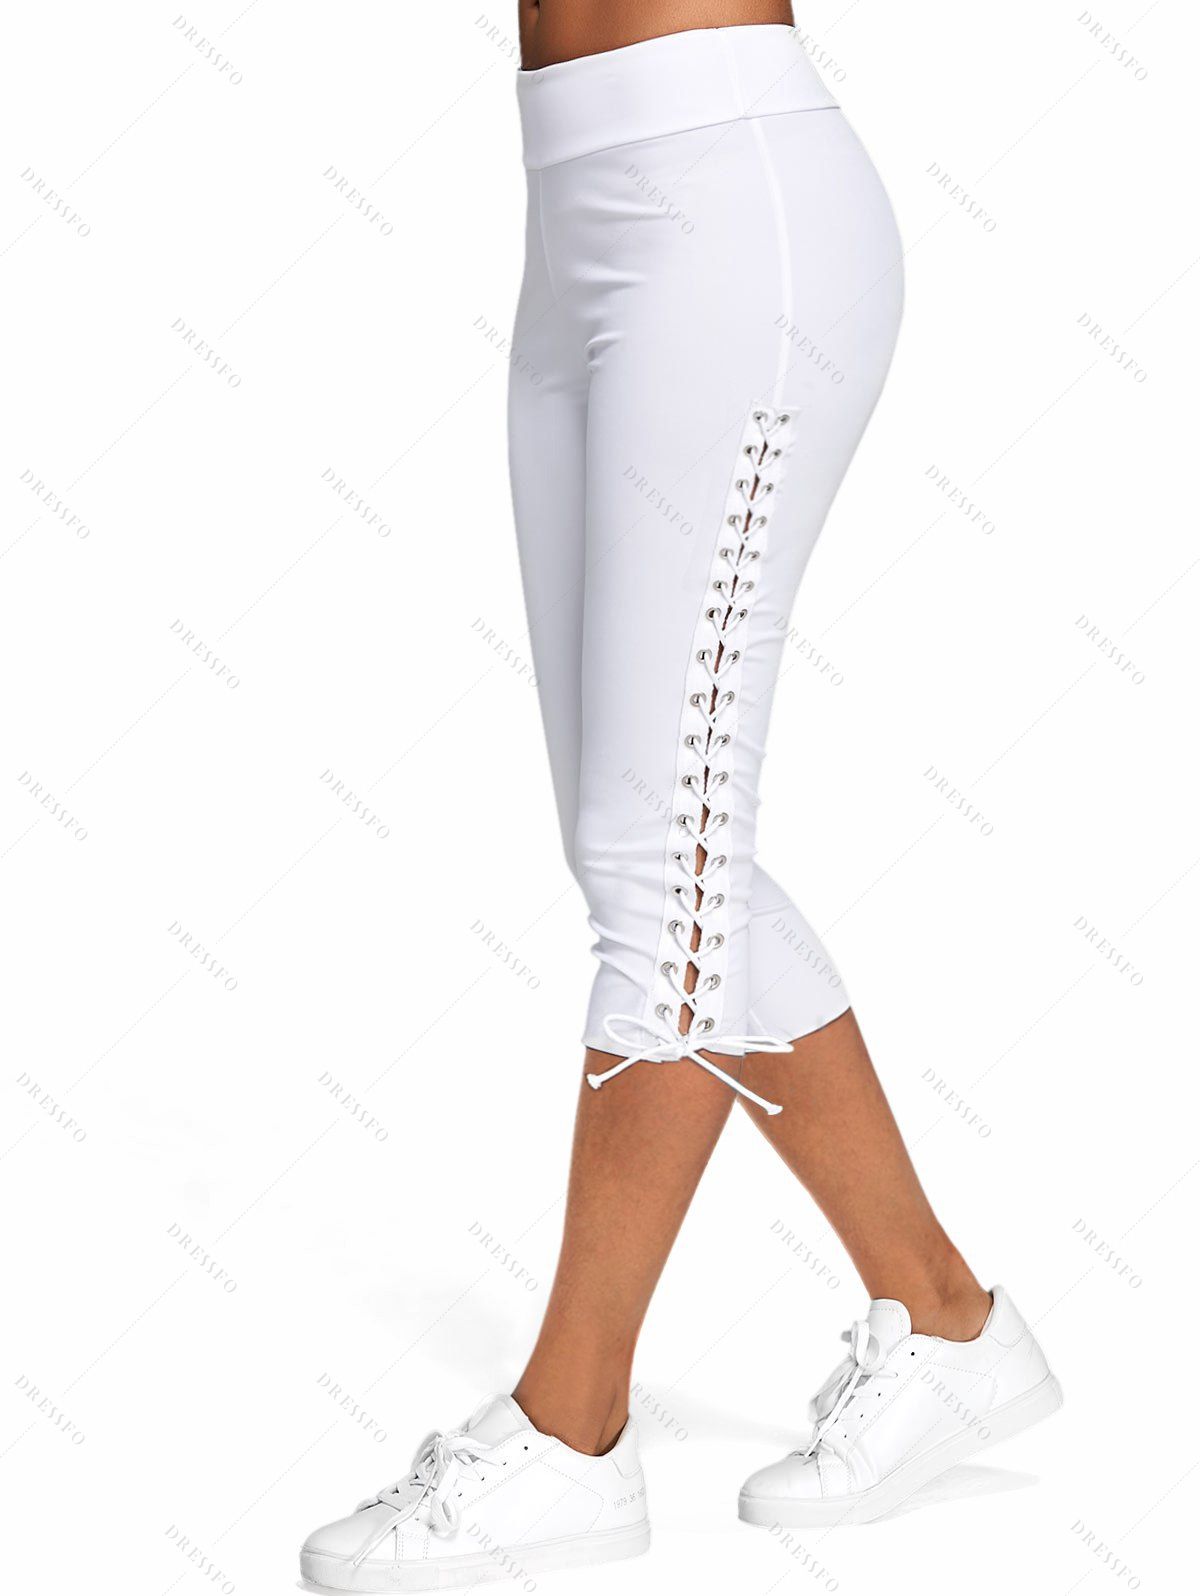 Lace Up Skinny Crop Leggings - WHITE L